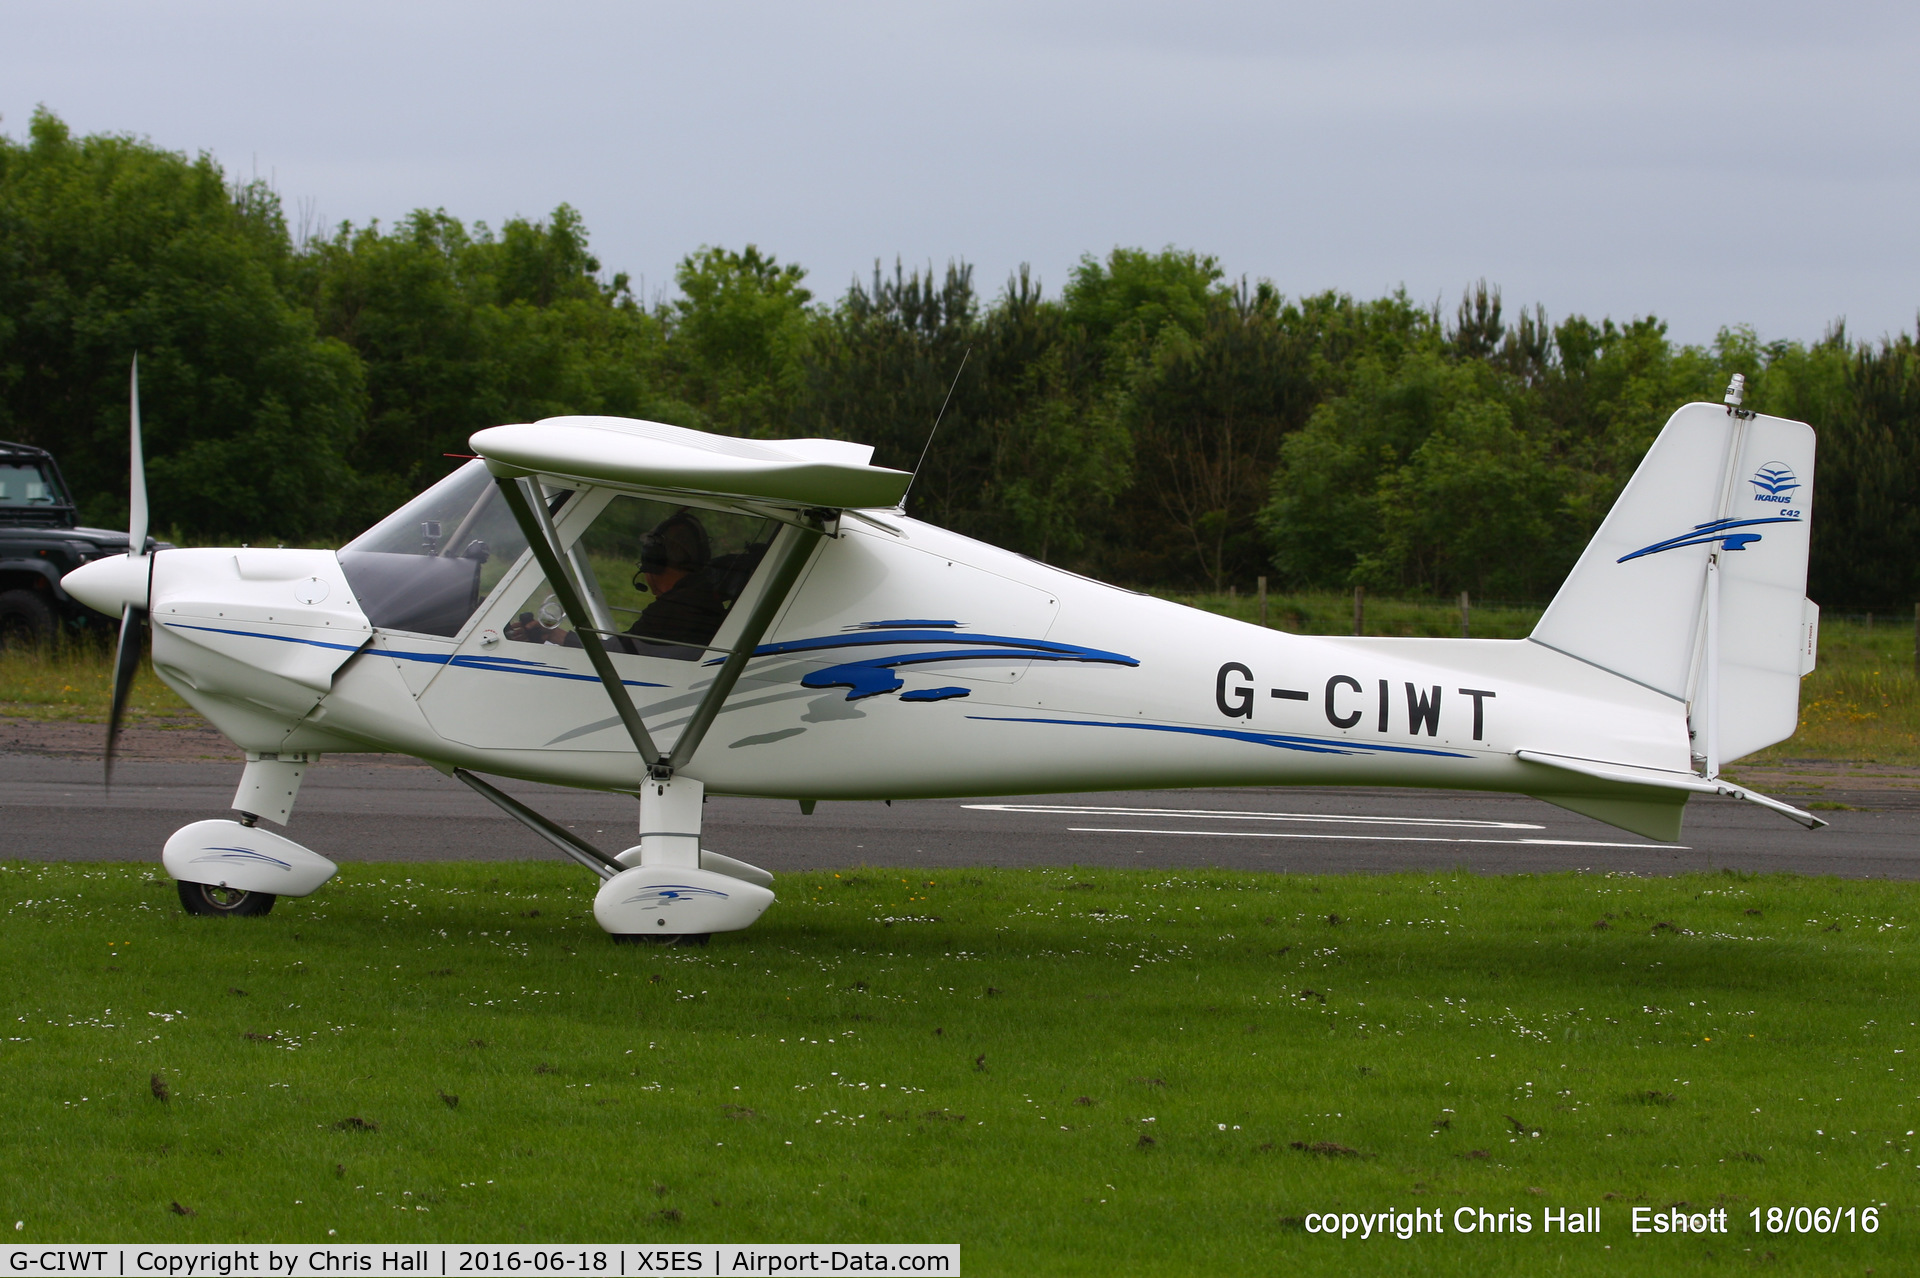 G-CIWT, 2015 Comco Ikarus C42 FB80 C/N 1507-7308, at the Great North Fly in. Eshott